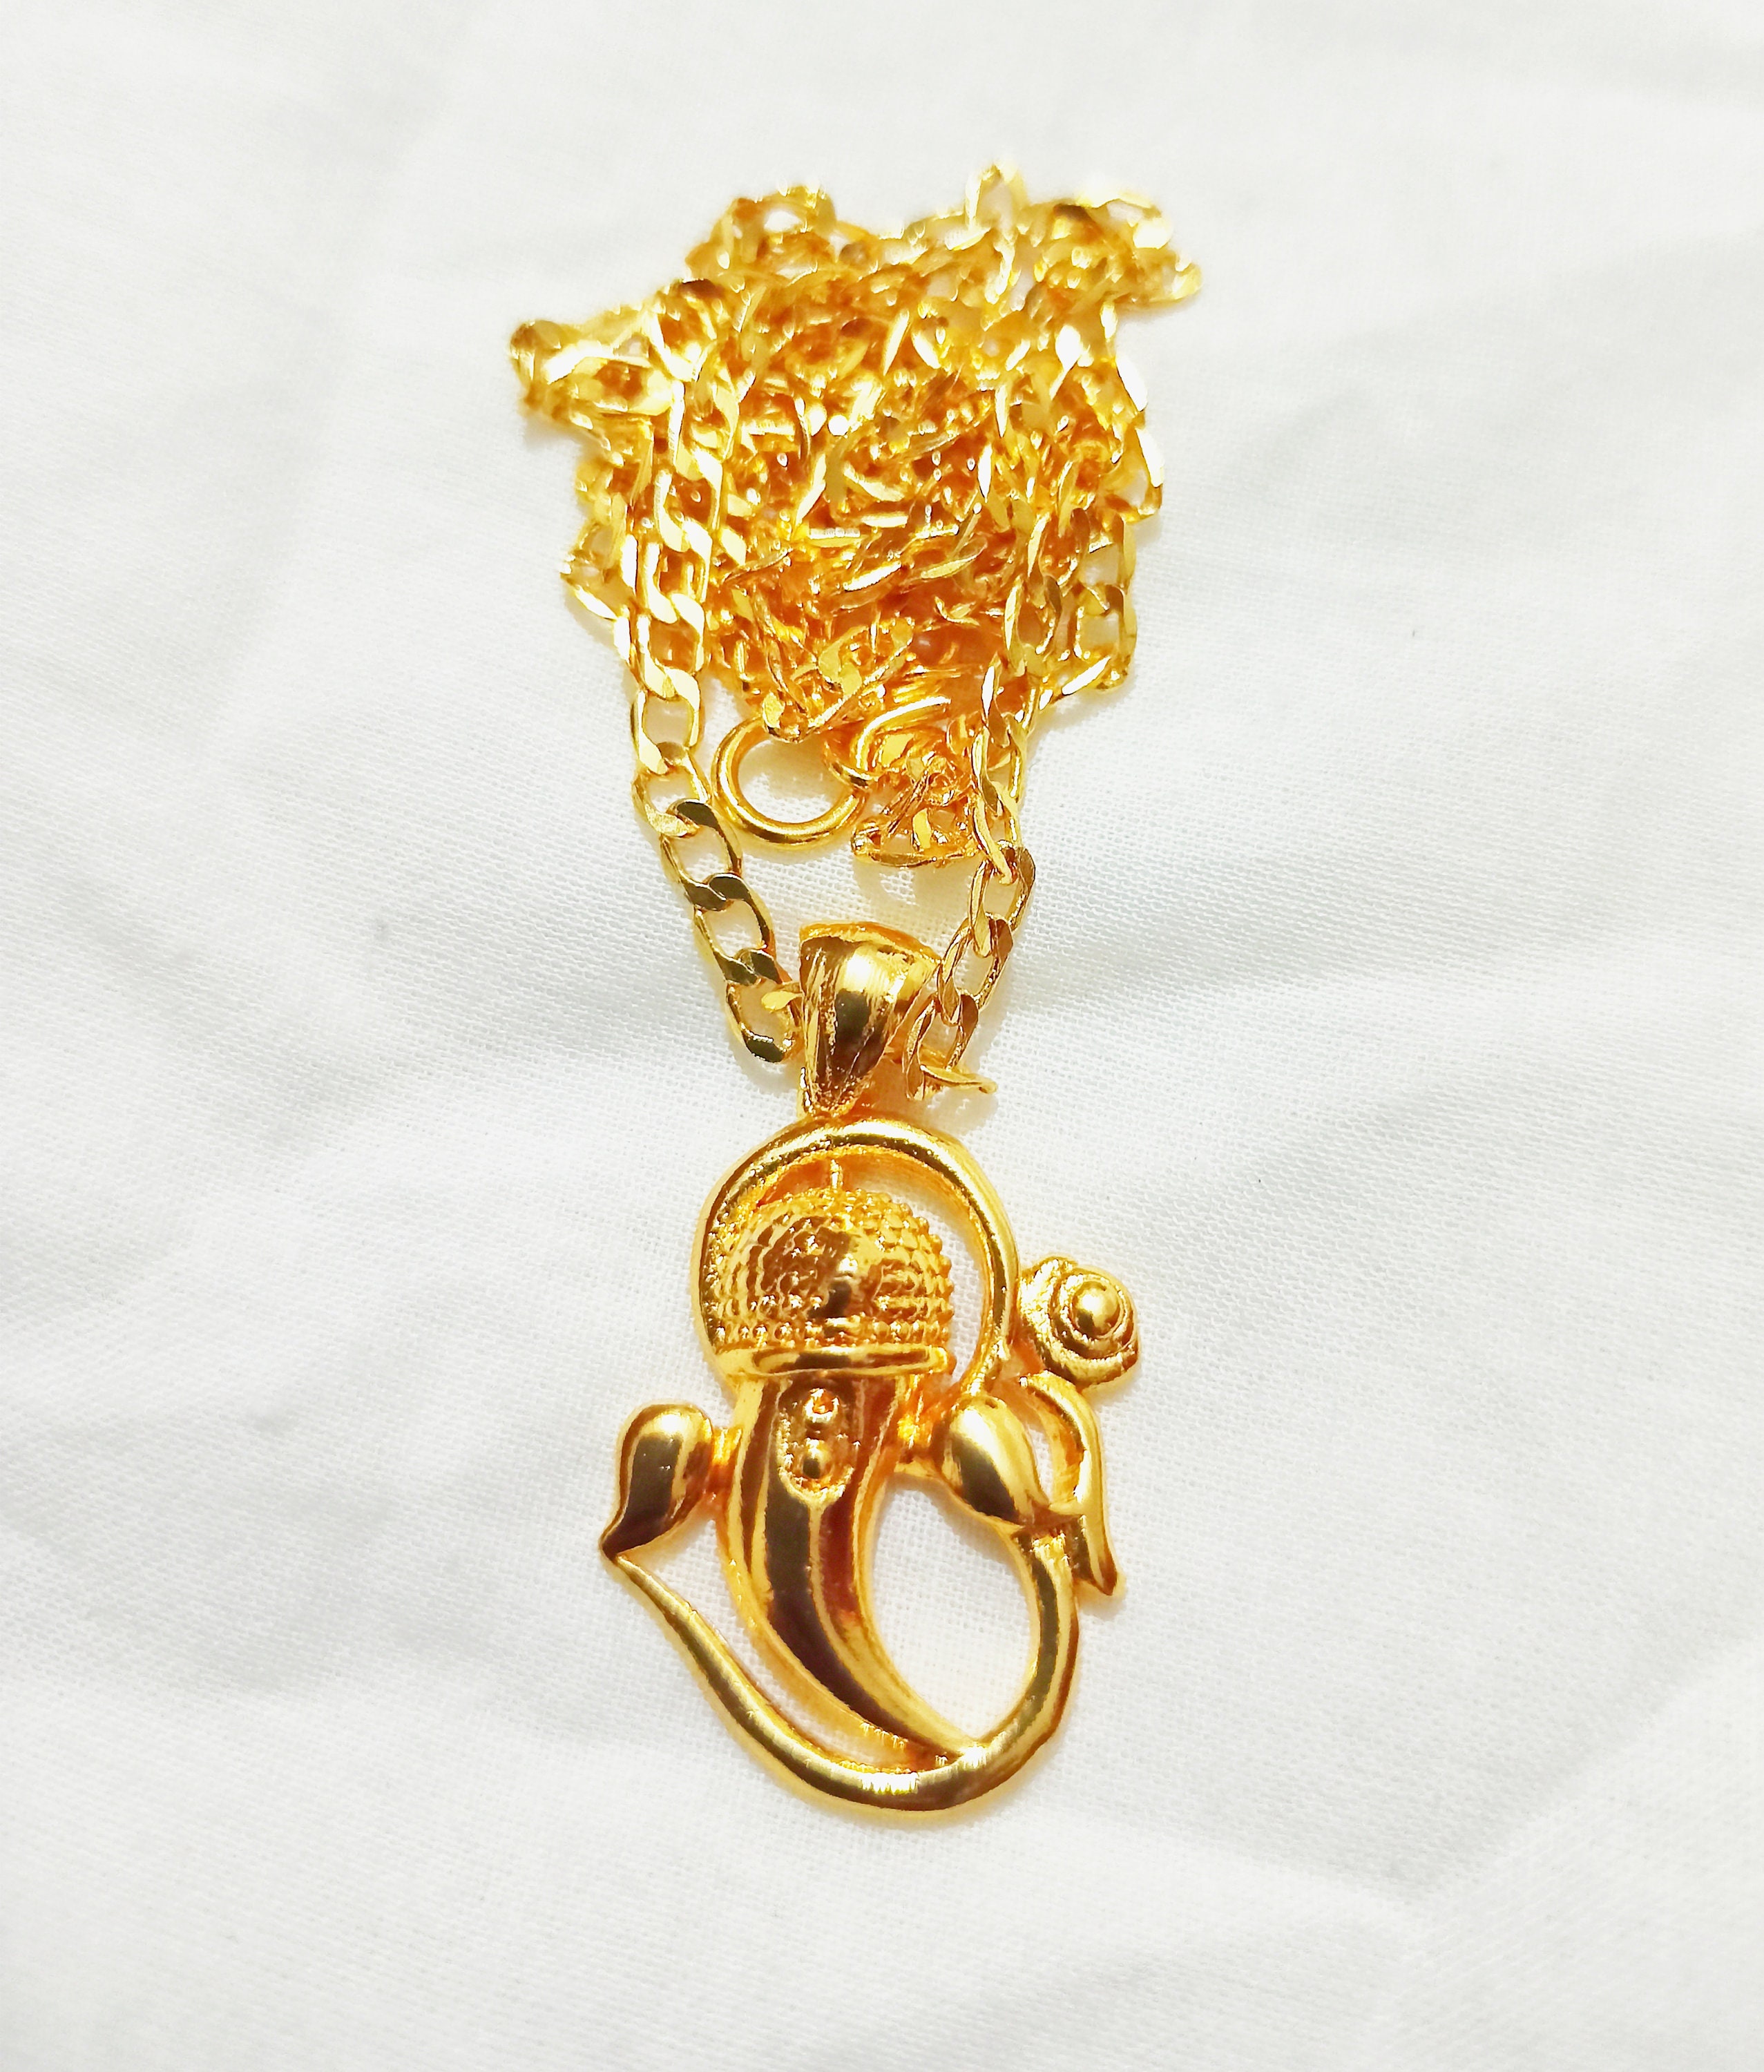 Shree Ganesh Pandant In Gold Plated Chain | Etsy